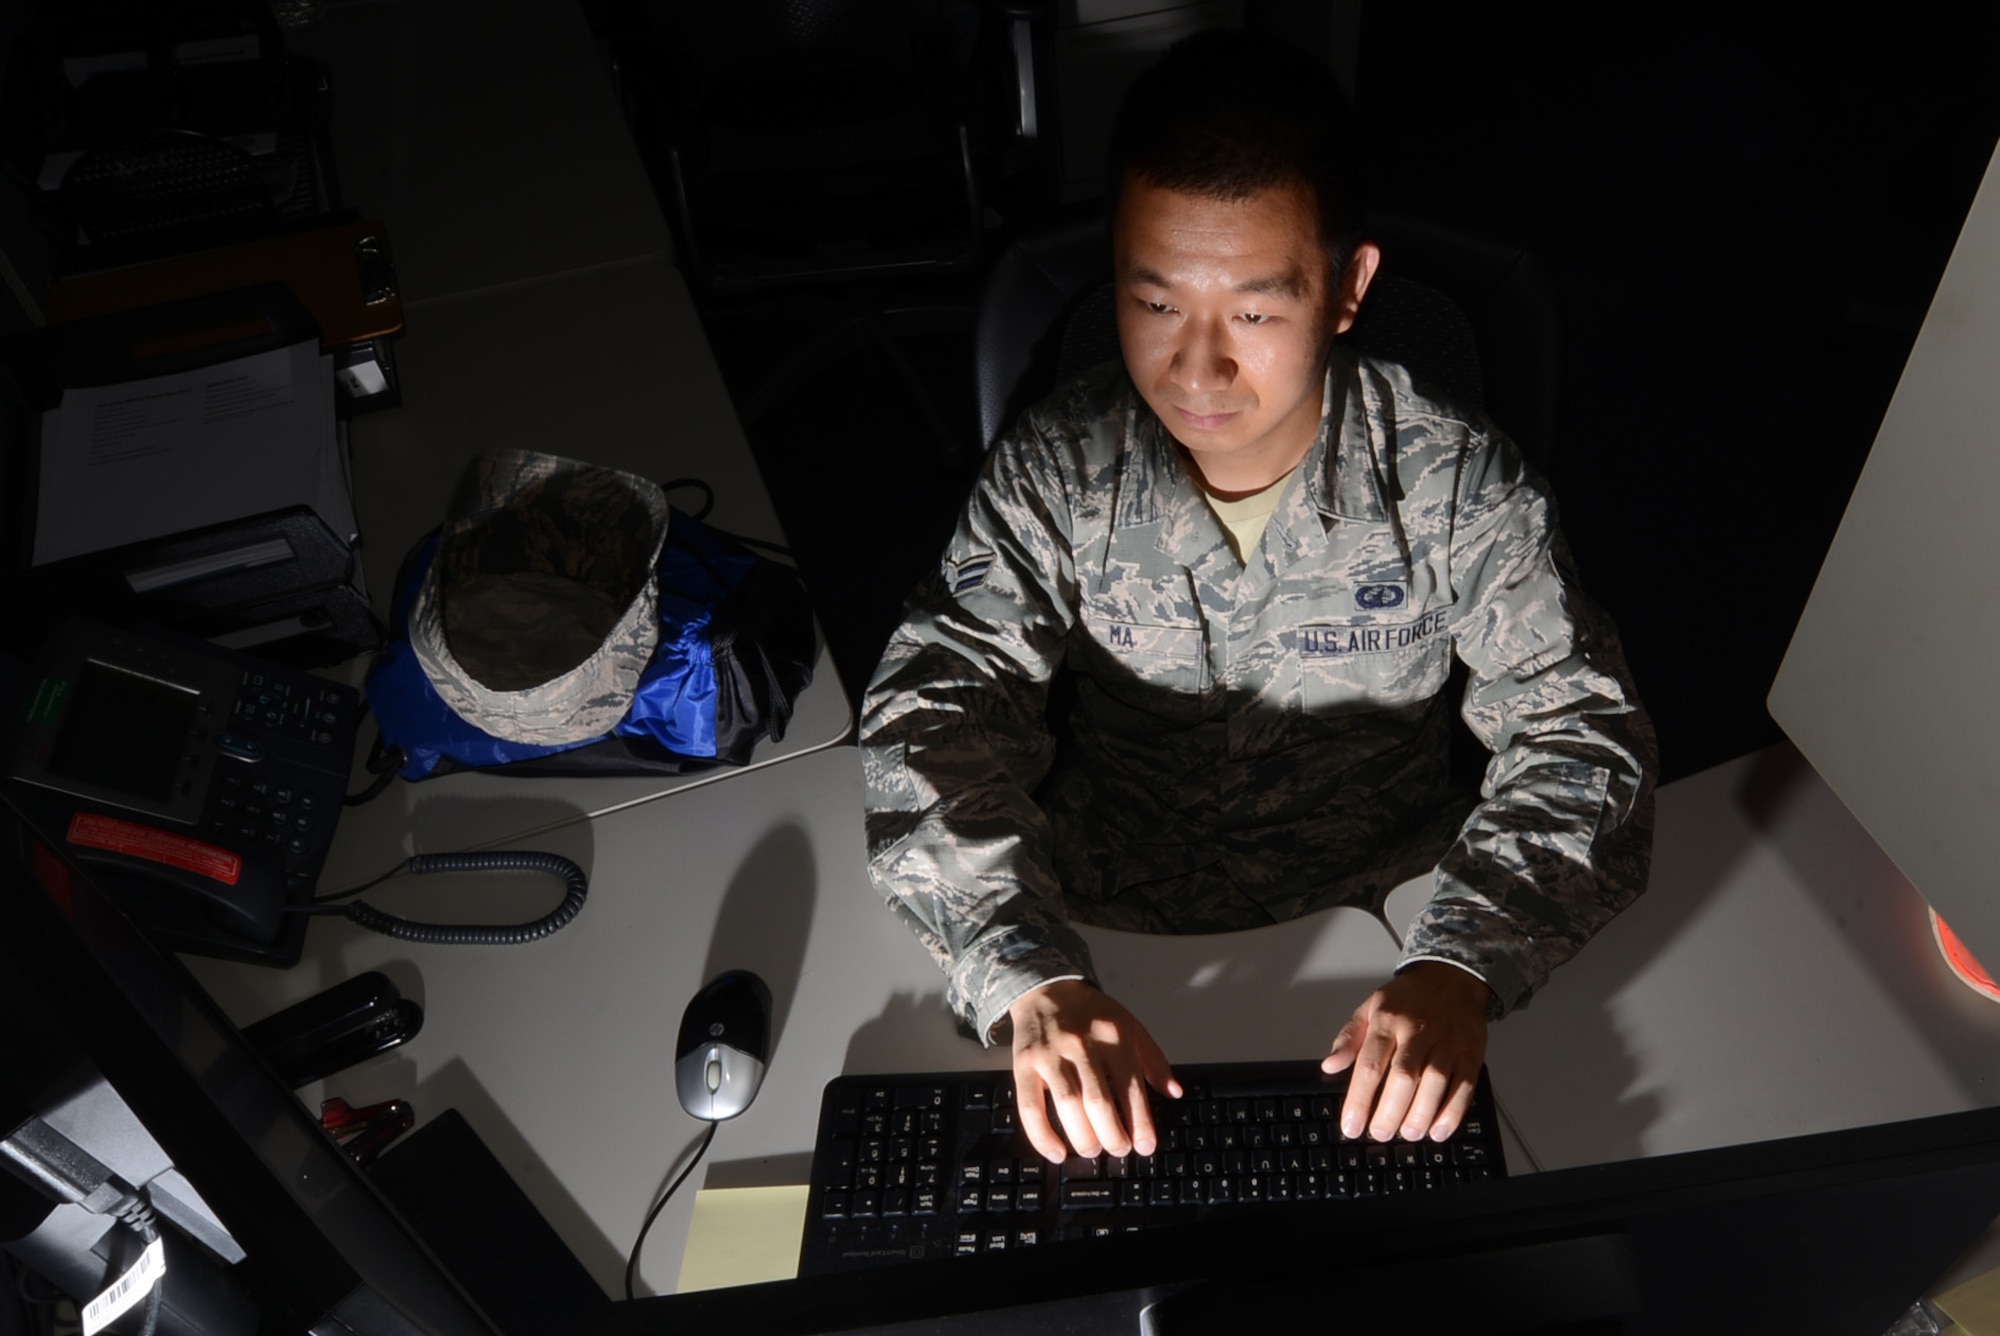 U.S. Air Force Airman 1st Class Bin Ma, 20th Comptroller Squadron financial services technician, works after hours reviewing finances for Airmen at Shaw Air Force Base, S.C., July 31, 2015. Ma is applying to commission in the Medical Service Corps for a position in hospital administration which is in charge of resources, personnel or money, to keep clinics running. (U.S. Air Force photo by Senior Airman Michael Cossaboom/Released)